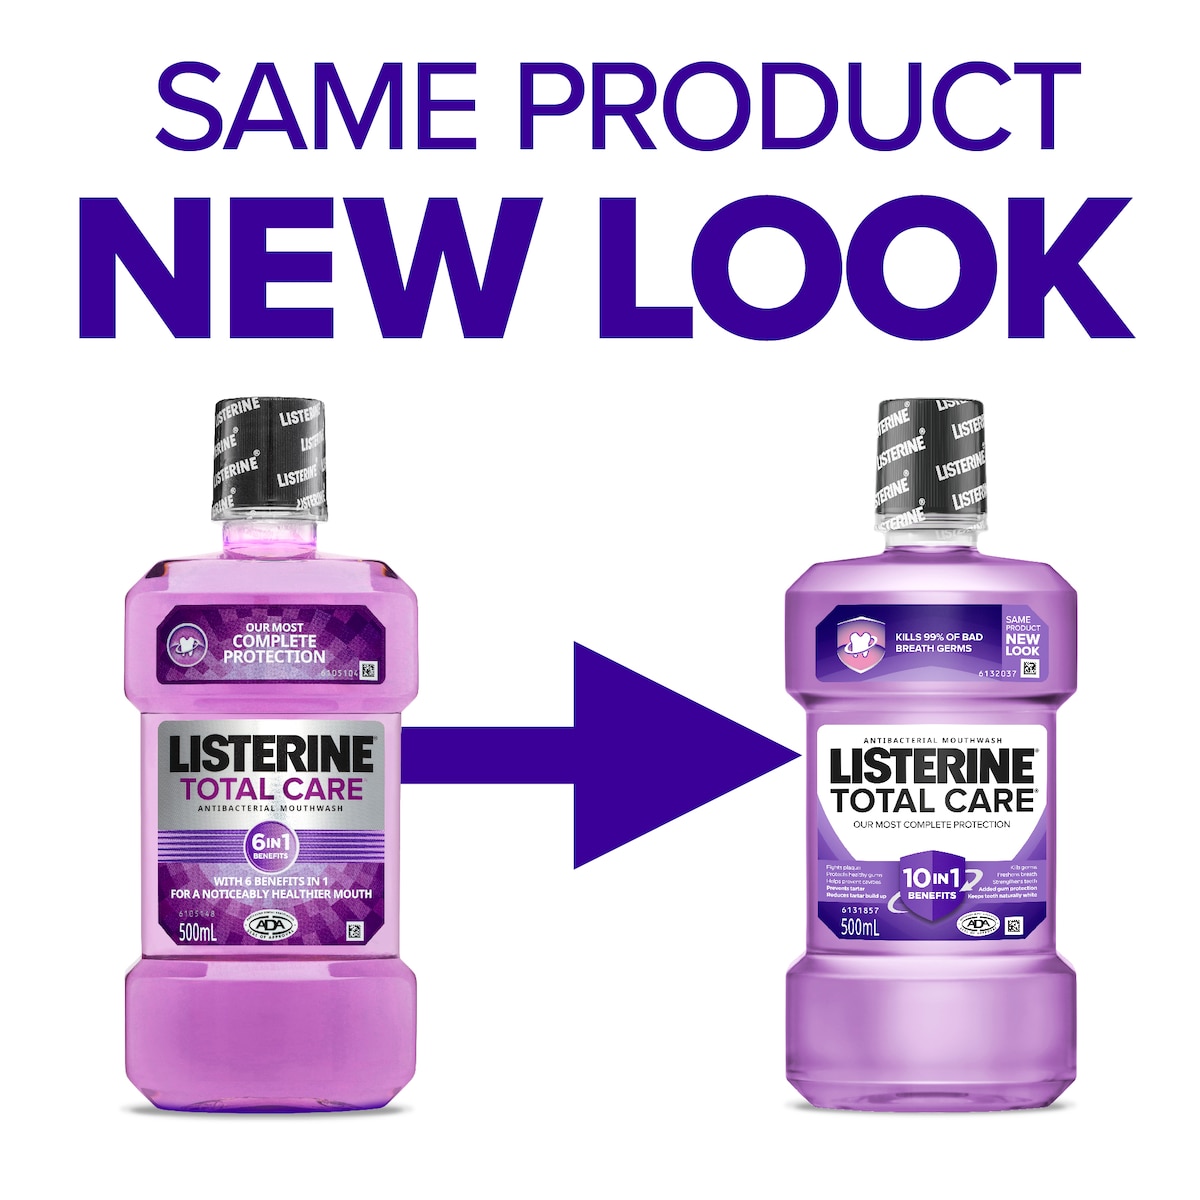 Listerine Total Care 6 In 1 Antibacterial Mouthwash 1 Litre